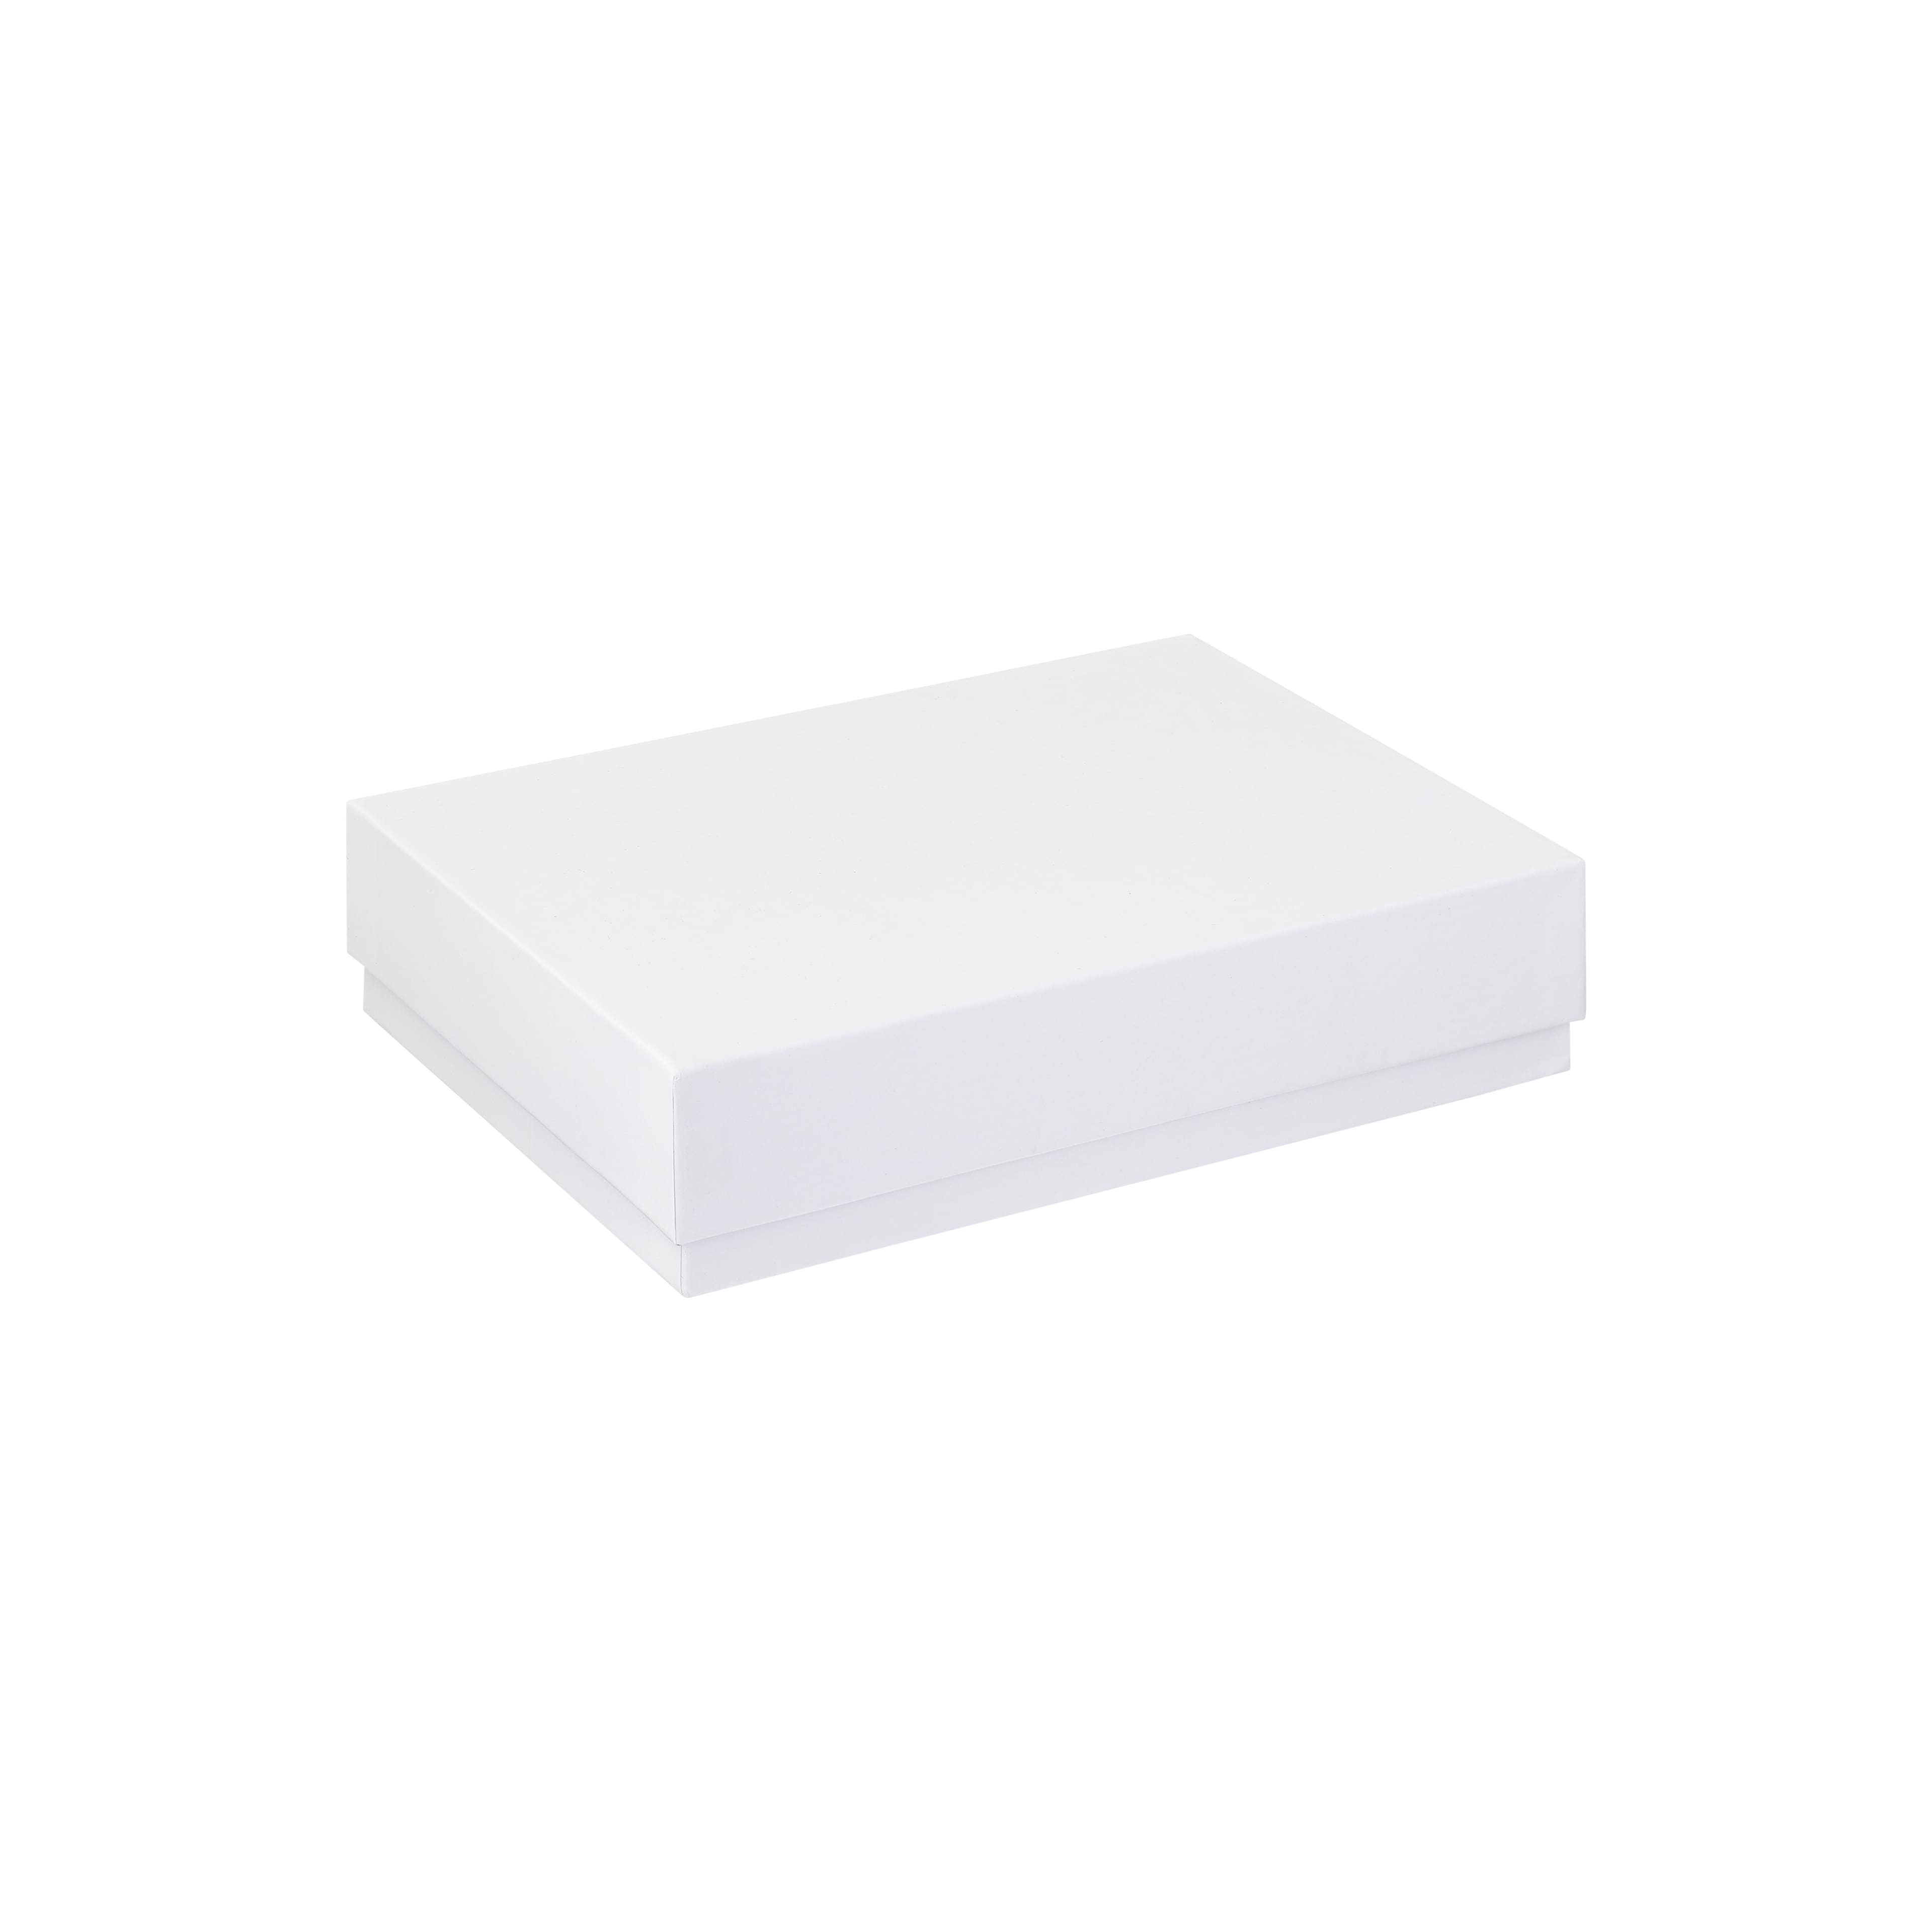 Hammont Clear Acrylic Boxes - 6 Pack - 2.25''x2.25''x2.25'' - Small Cube  Lucite Boxes for Gifts, Weddings, Party Favors, Treats, Candies 